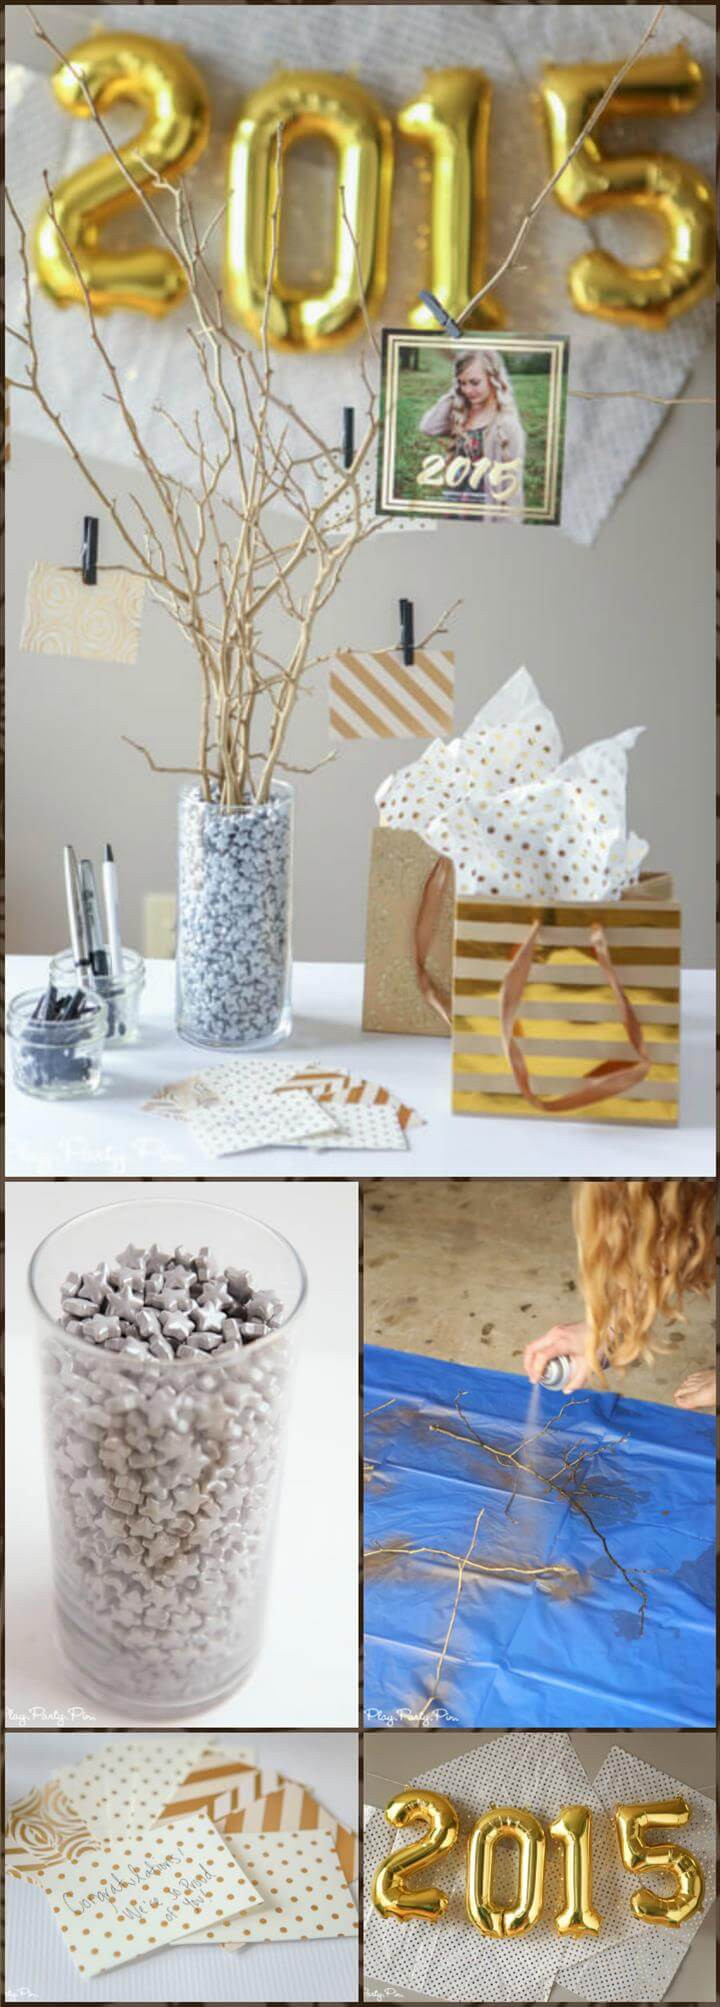 Cool Ideas For Graduation Party
 50 DIY Graduation Party Ideas & Decorations Page 3 of 4